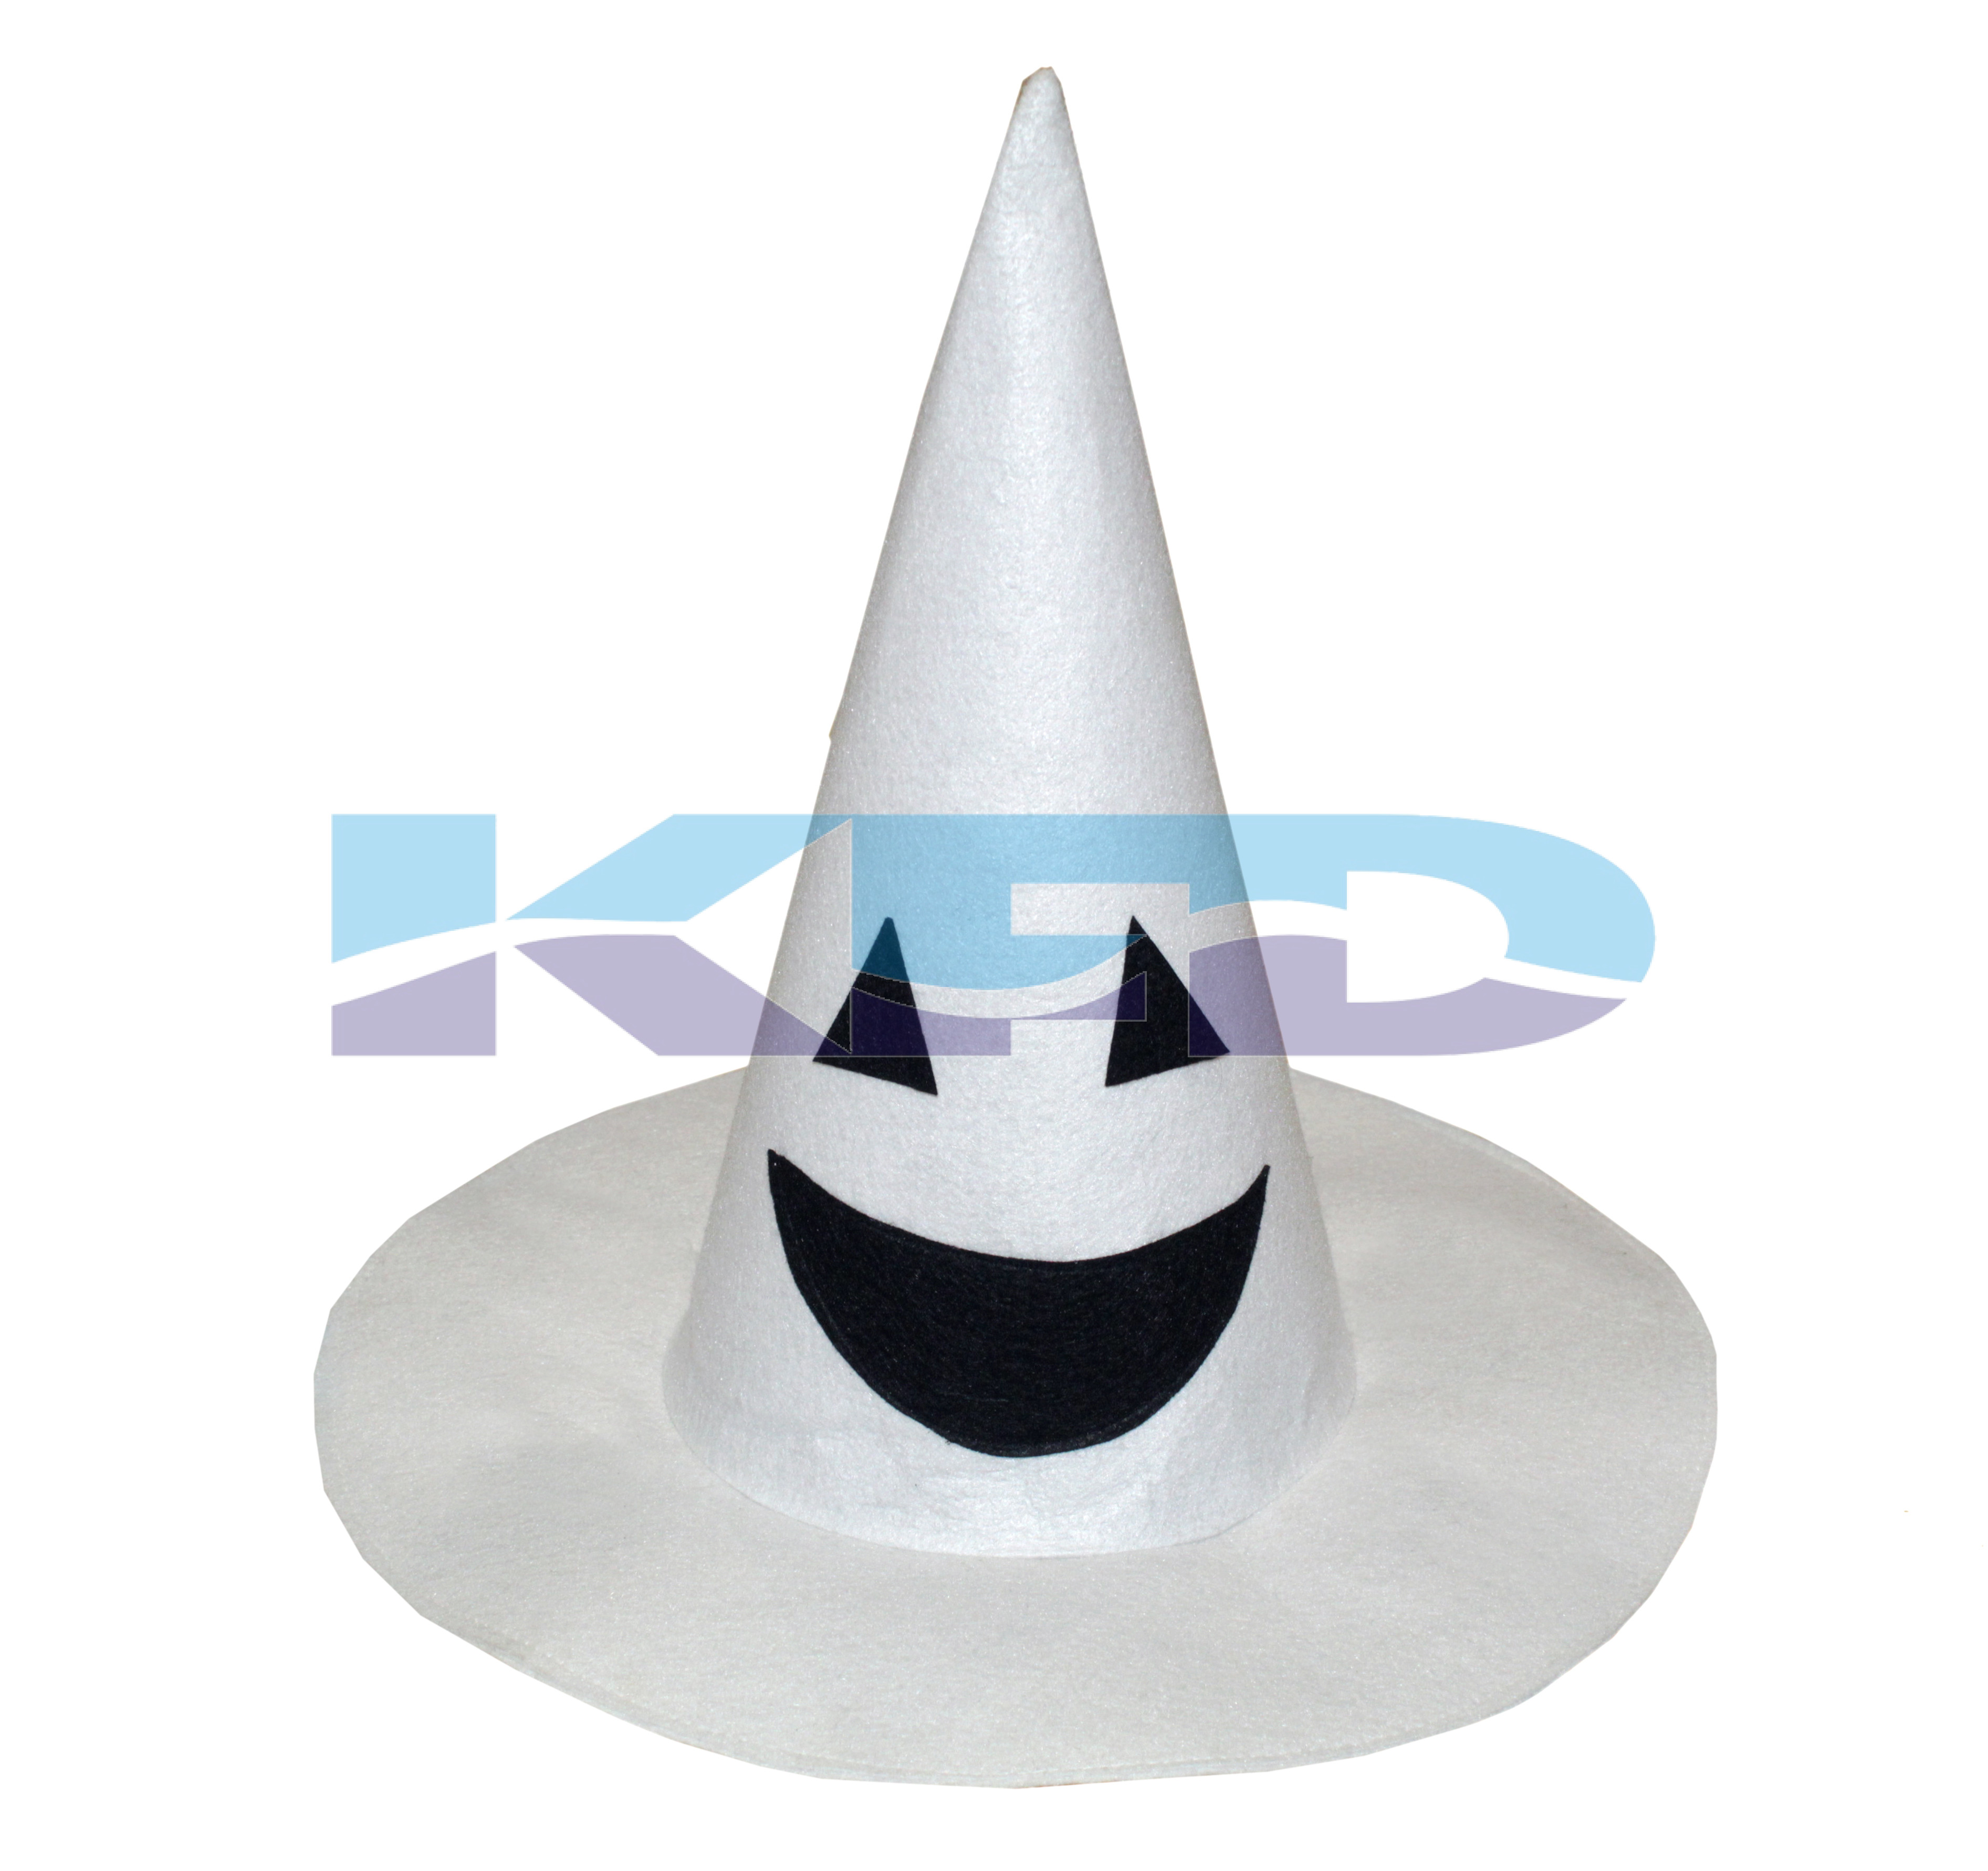 Witch white Hat fancy dress for kids, Halloween Costume for School Annual function/Theme Party/Competition/Stage Shows Dress